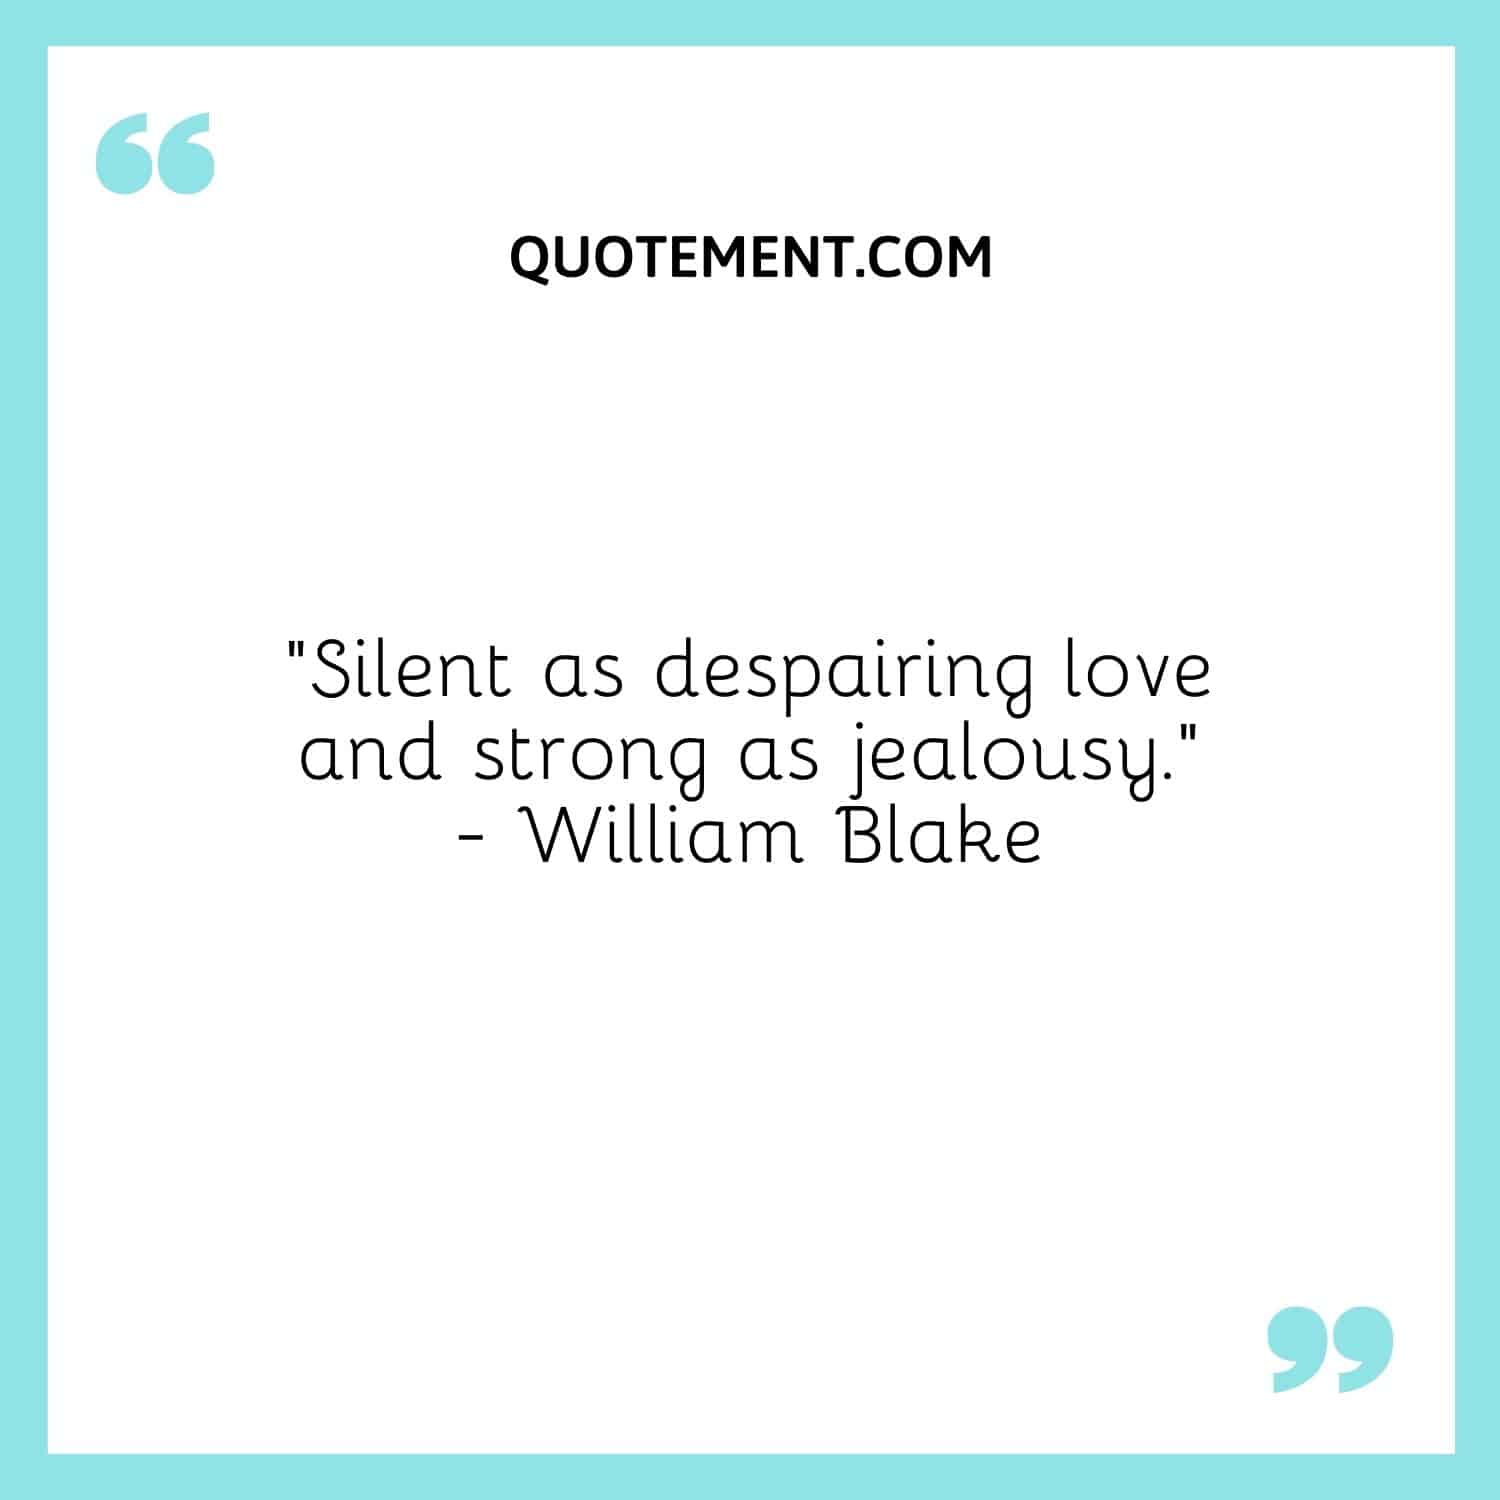 “Silent as despairing love and strong as jealousy.” — William Blake